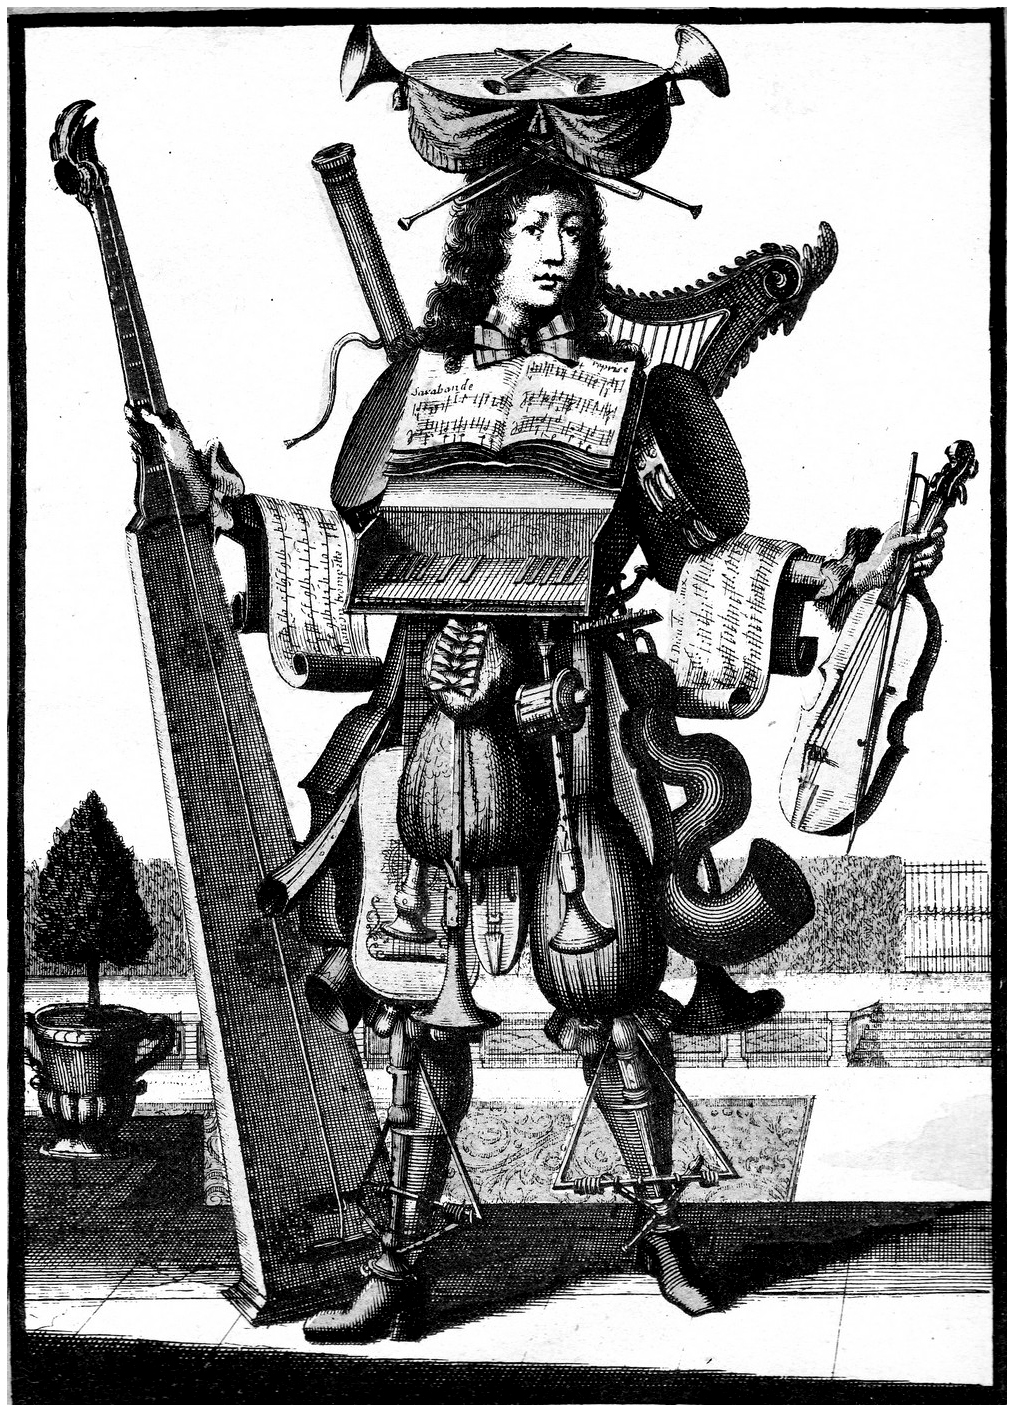 The man orchestra, ancient engraving. This adult coloring page is inspired by an old engraving of the orchestra man.
It presents a man dressed in a simple costume, but composed of multiple instruments.